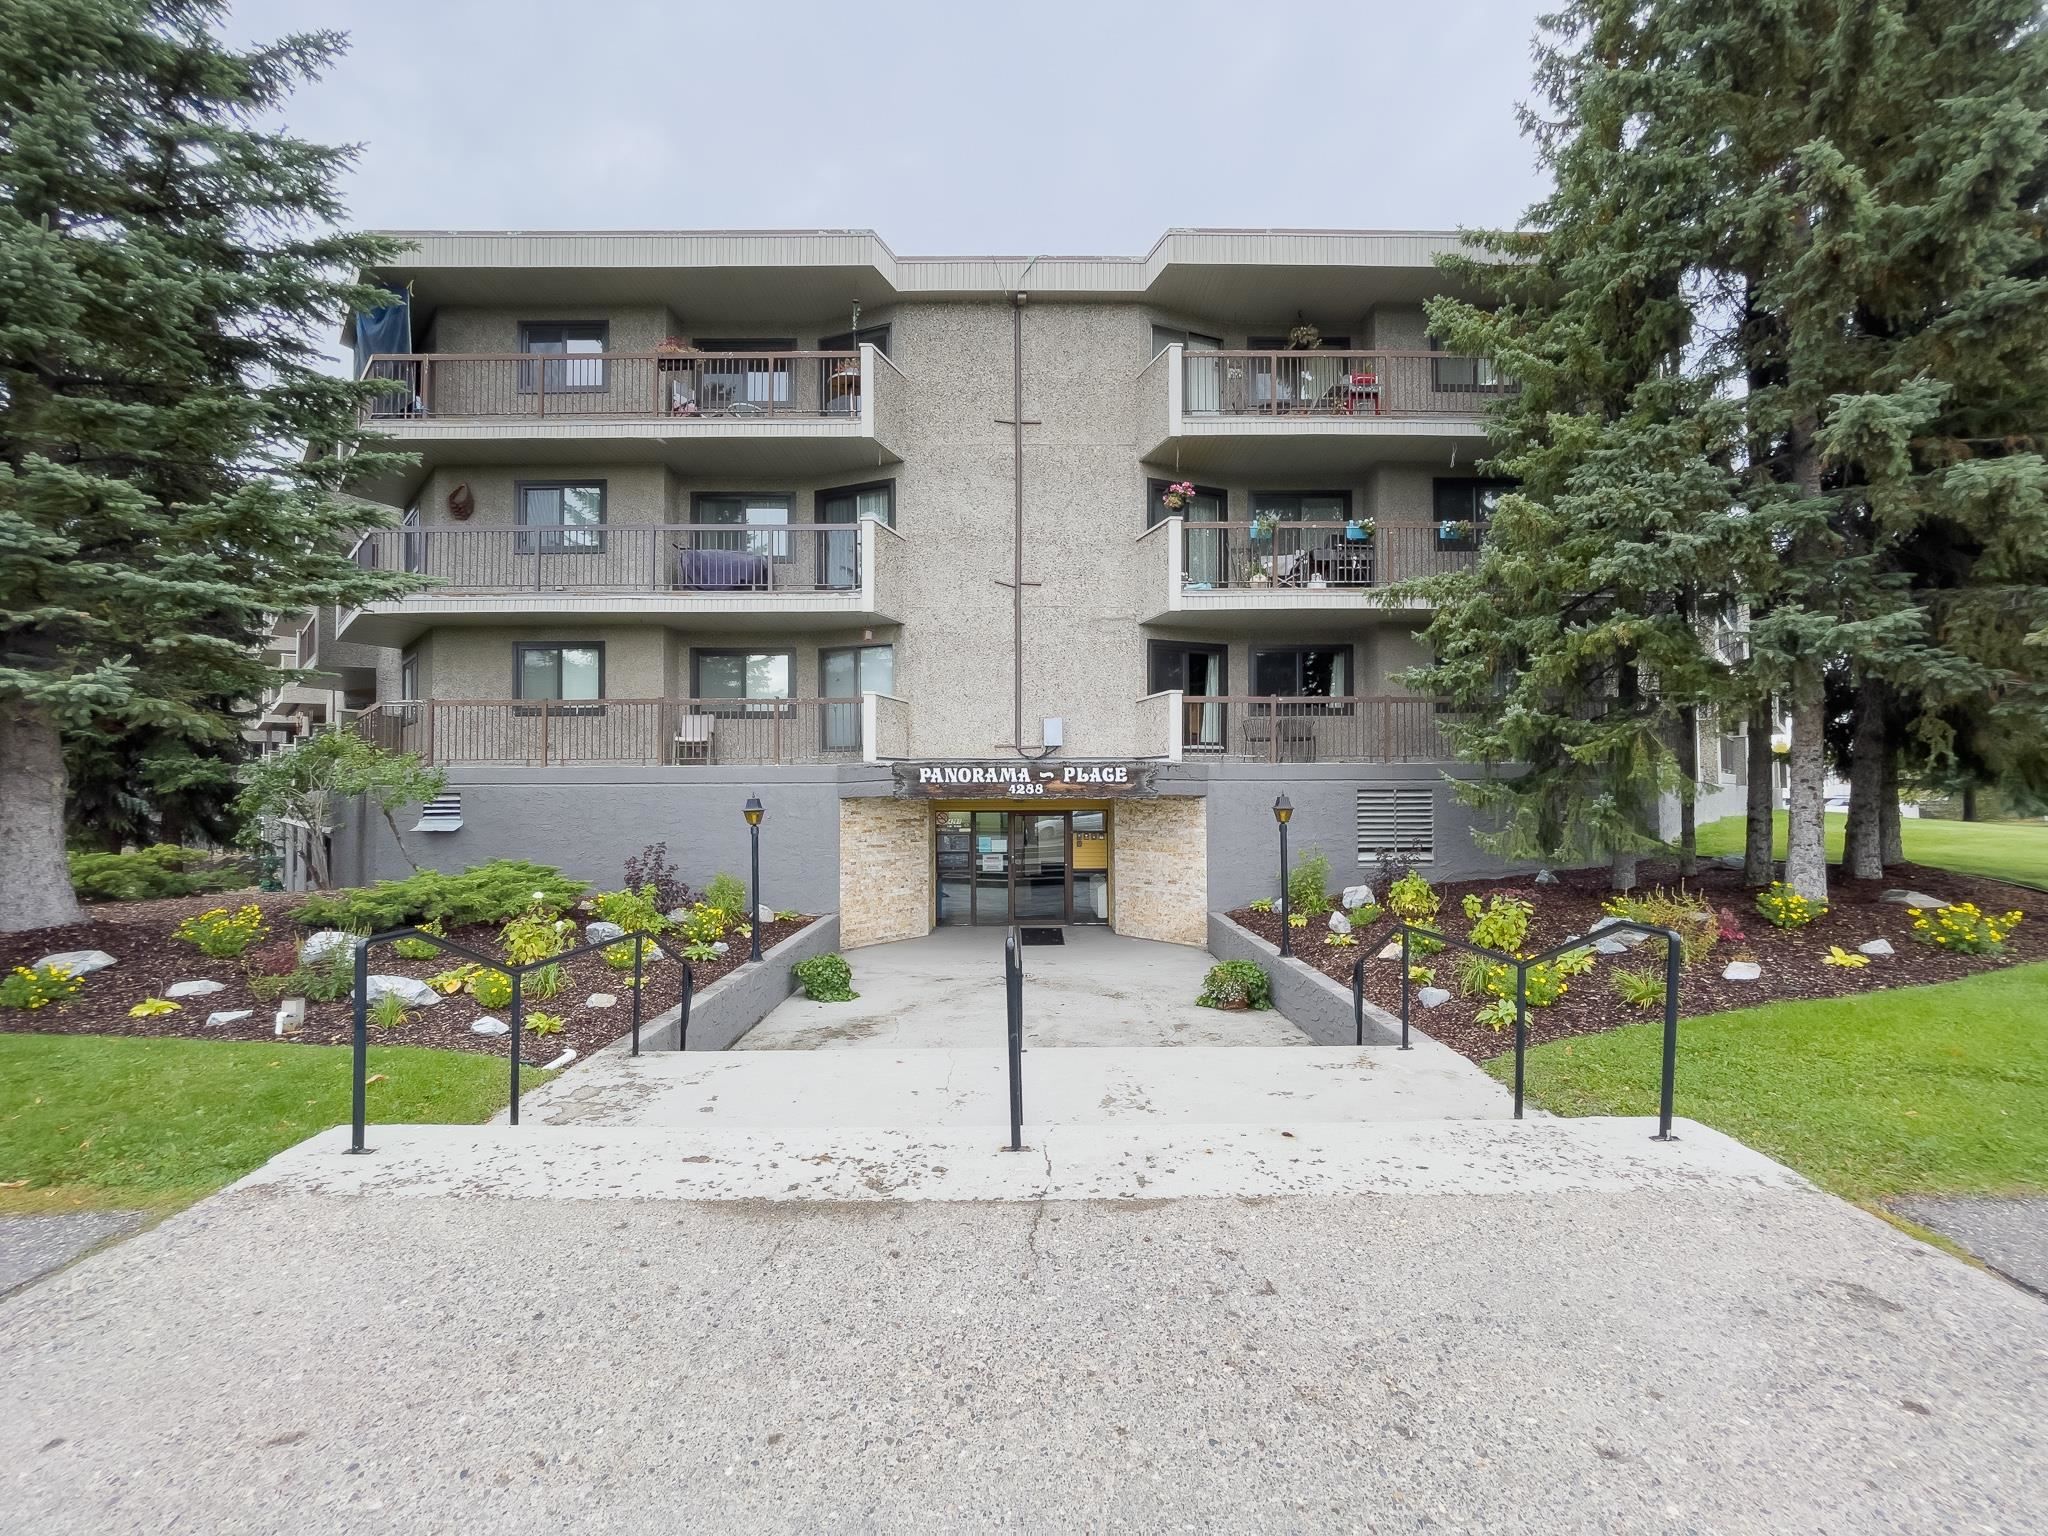 Main Photo: 206 4288 15TH Avenue in Prince George: Lakewood Condo for sale (PG City West (Zone 71))  : MLS®# R2621161